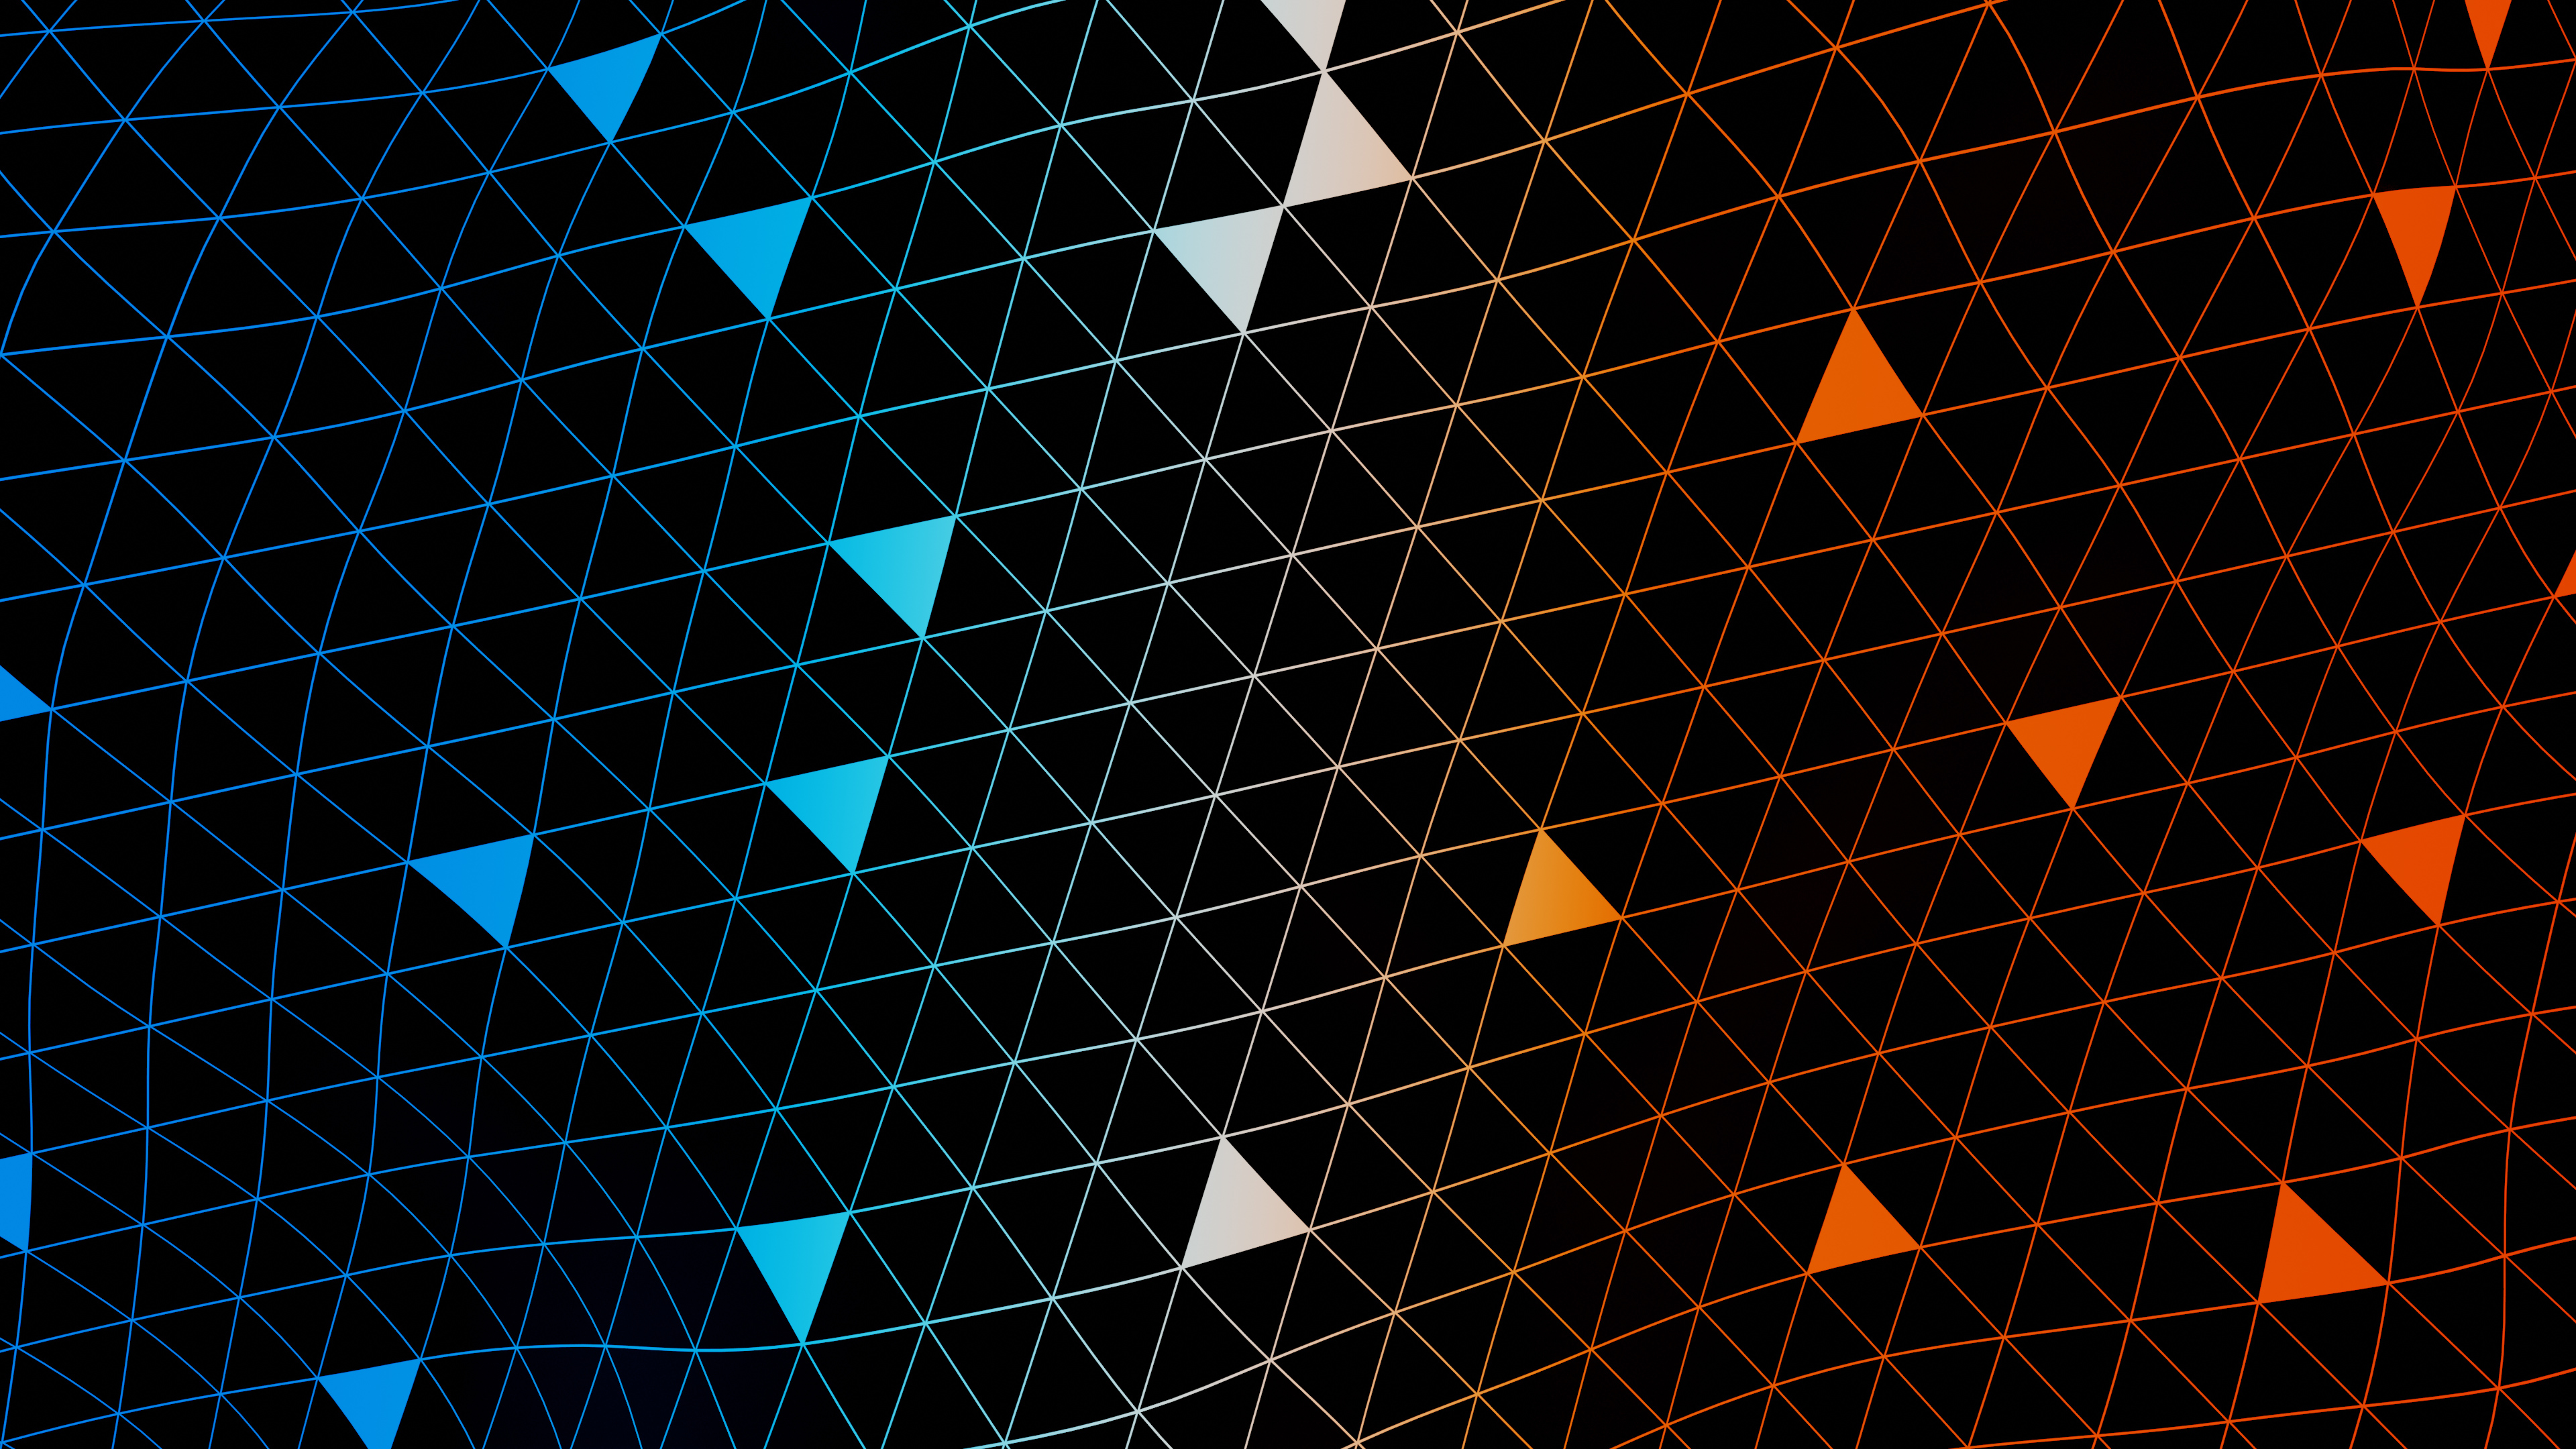 Abstract Triangle 4k Ultra HD Wallpaper by Y0katan